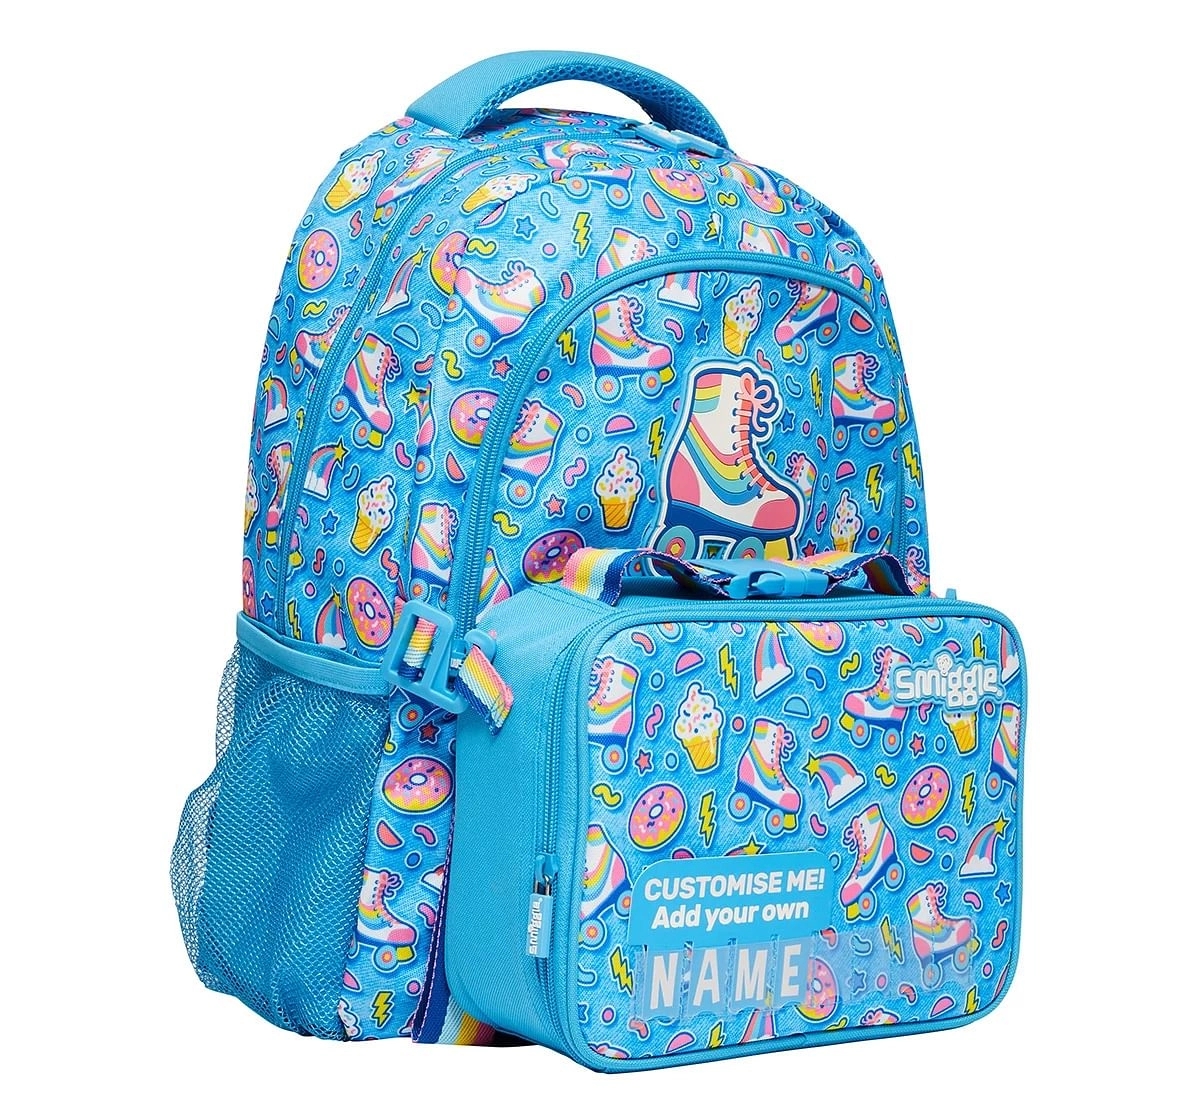 Smiggle Bright Side Classic Attachable Colourful printed bag for Kids 3Y+, Blue and Black